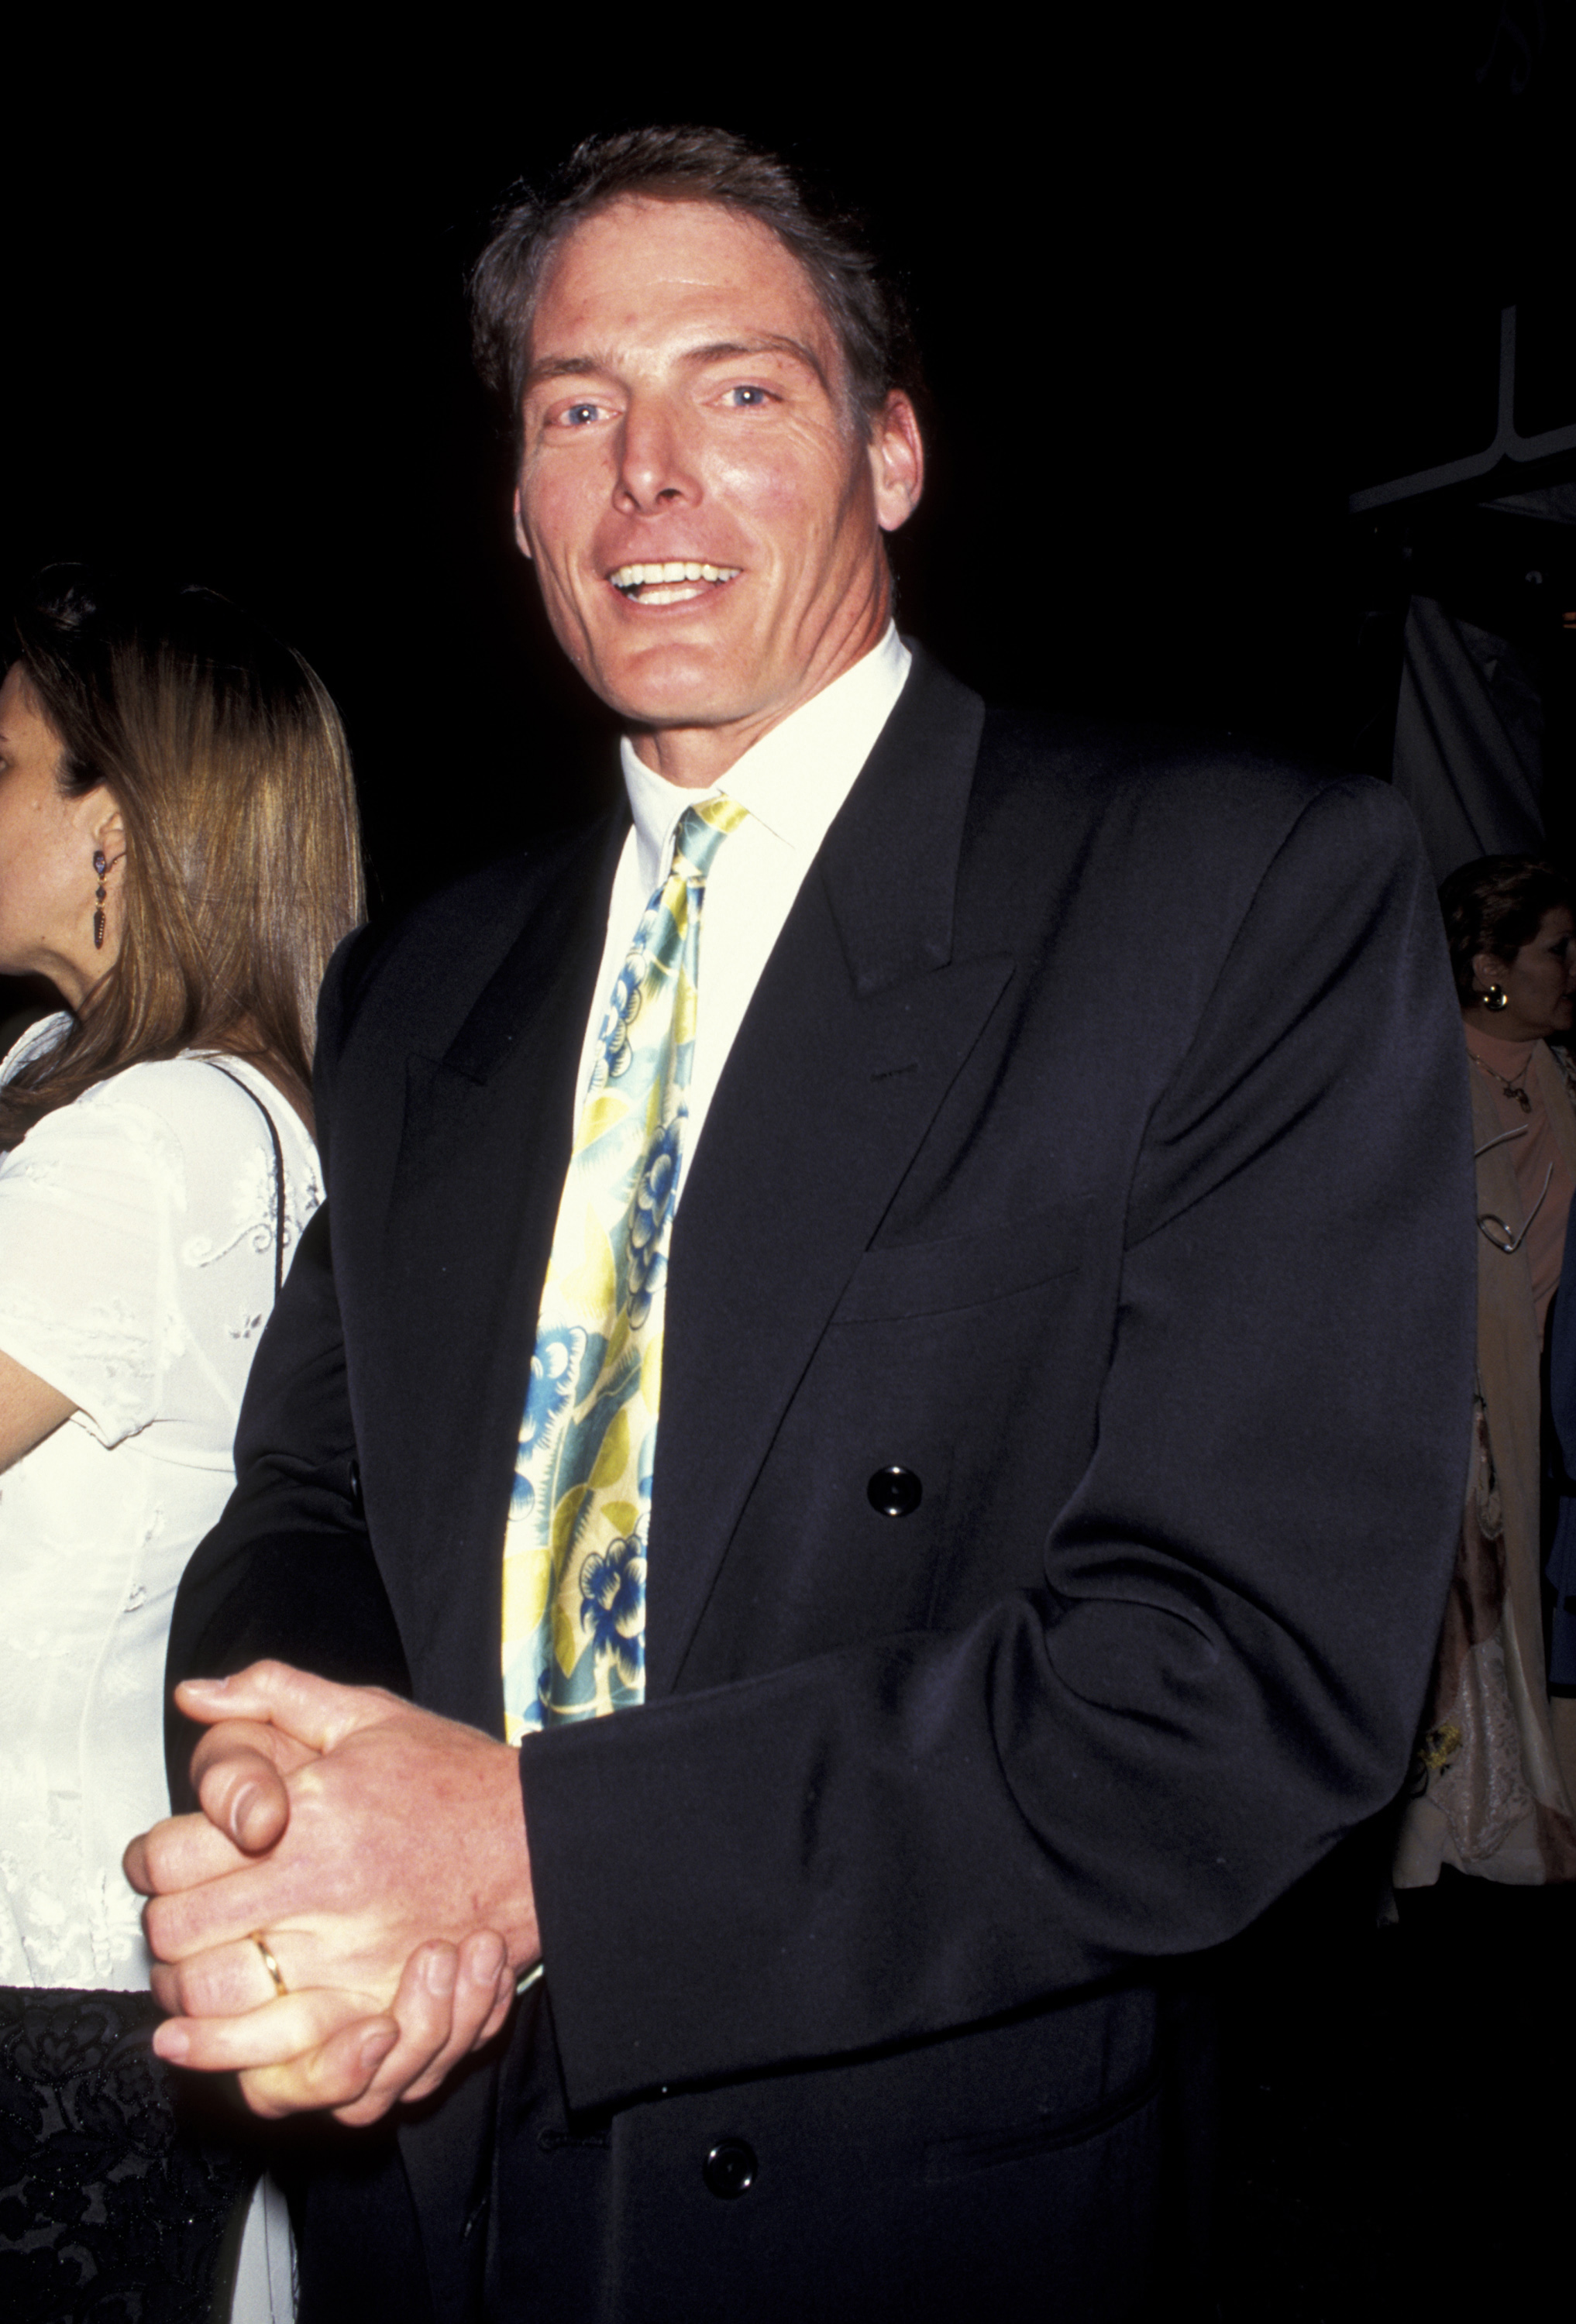 Christopher Reeve at the "Indiscretions" New York City premiere after party on April 27, 1995. | Source: Getty Images